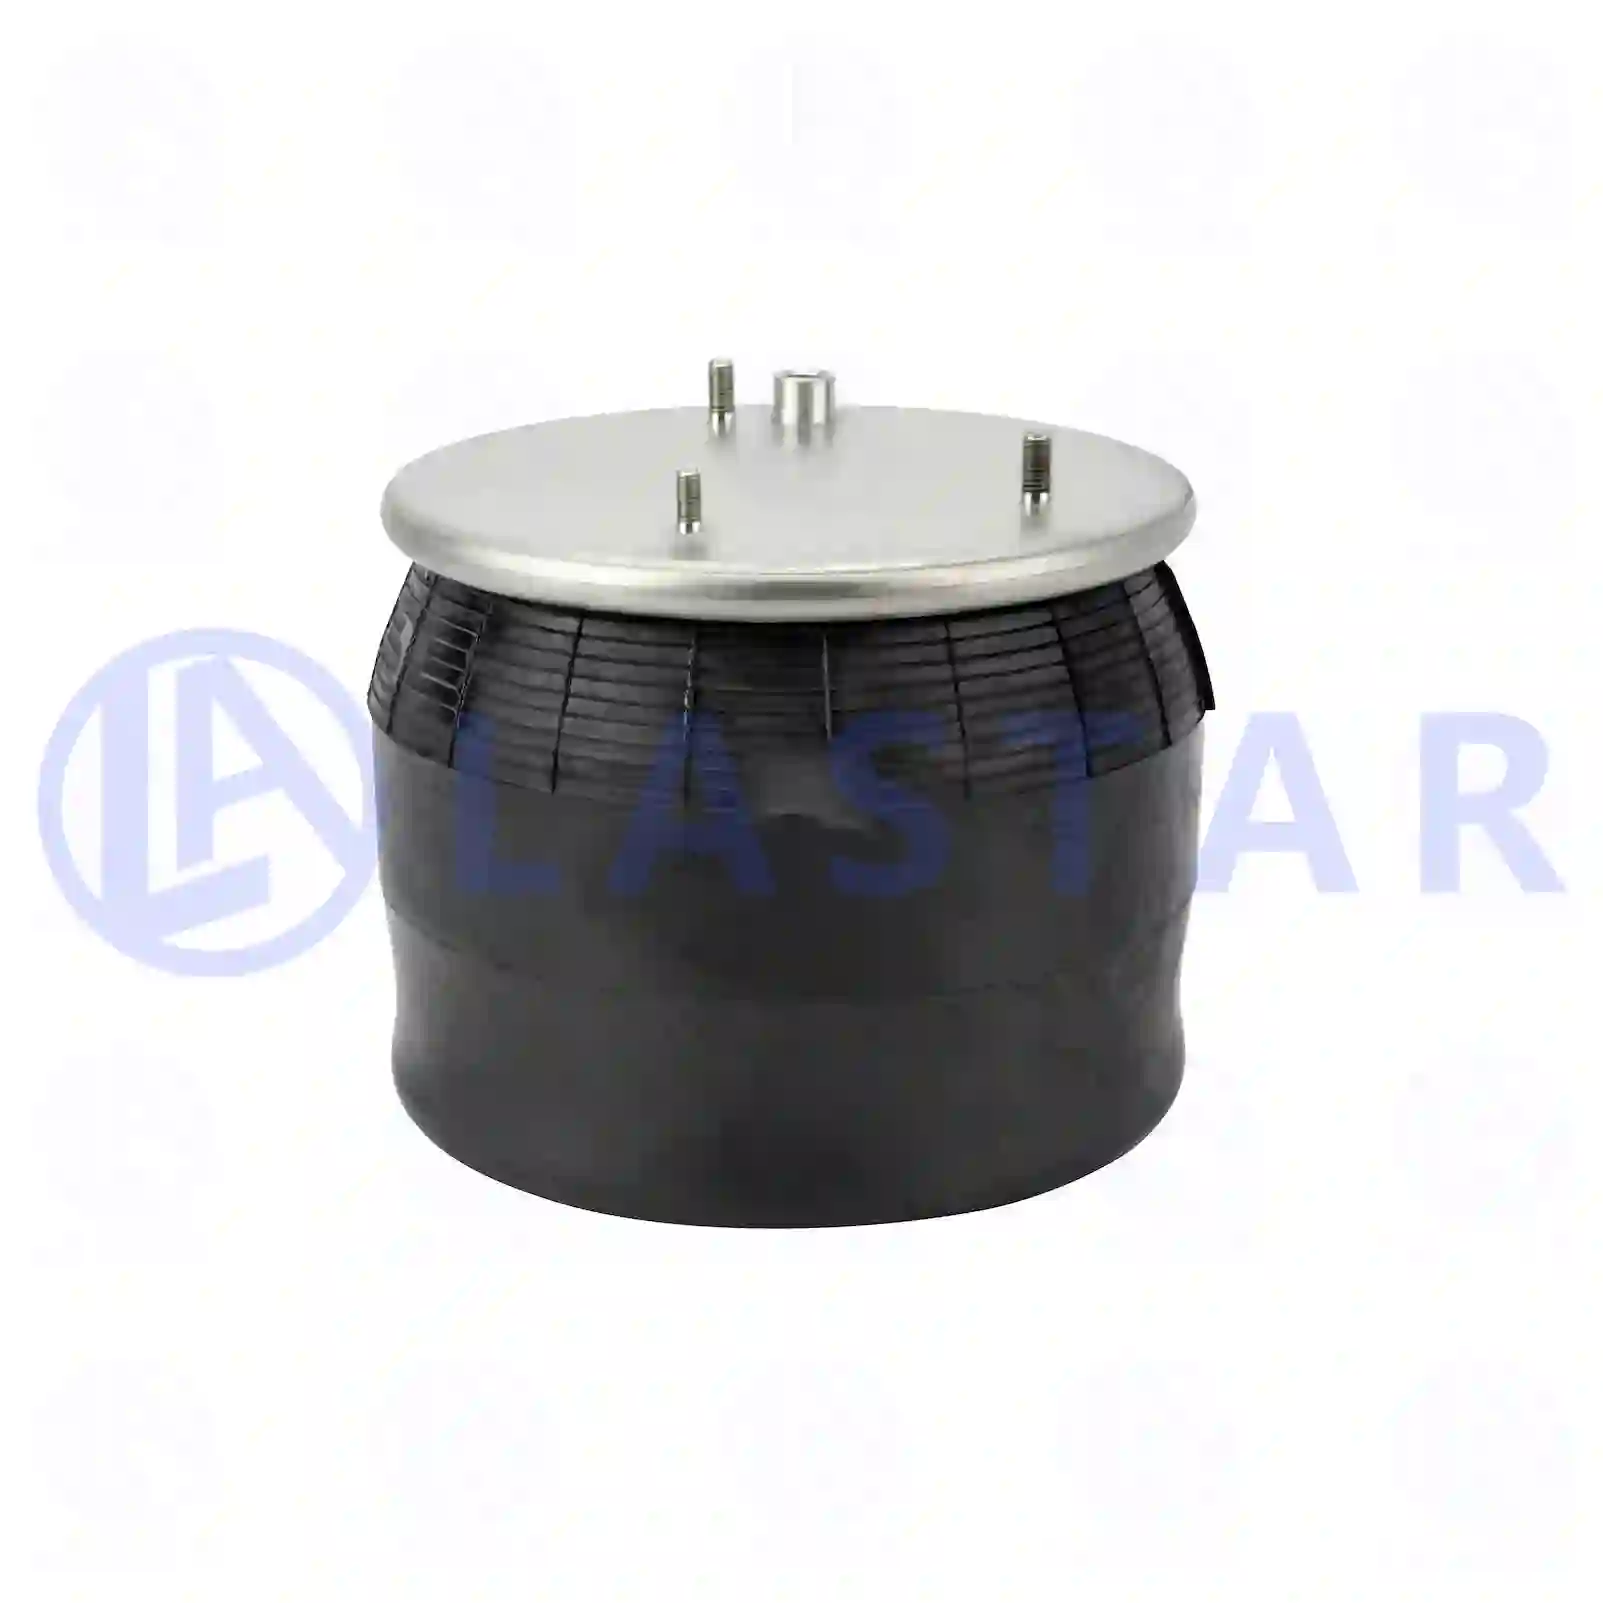 Air spring, with steel piston, 77728497, 0388165, 0388166, 1697678, 388165, 388166, MLF7060, ZG40778-0008 ||  77728497 Lastar Spare Part | Truck Spare Parts, Auotomotive Spare Parts Air spring, with steel piston, 77728497, 0388165, 0388166, 1697678, 388165, 388166, MLF7060, ZG40778-0008 ||  77728497 Lastar Spare Part | Truck Spare Parts, Auotomotive Spare Parts